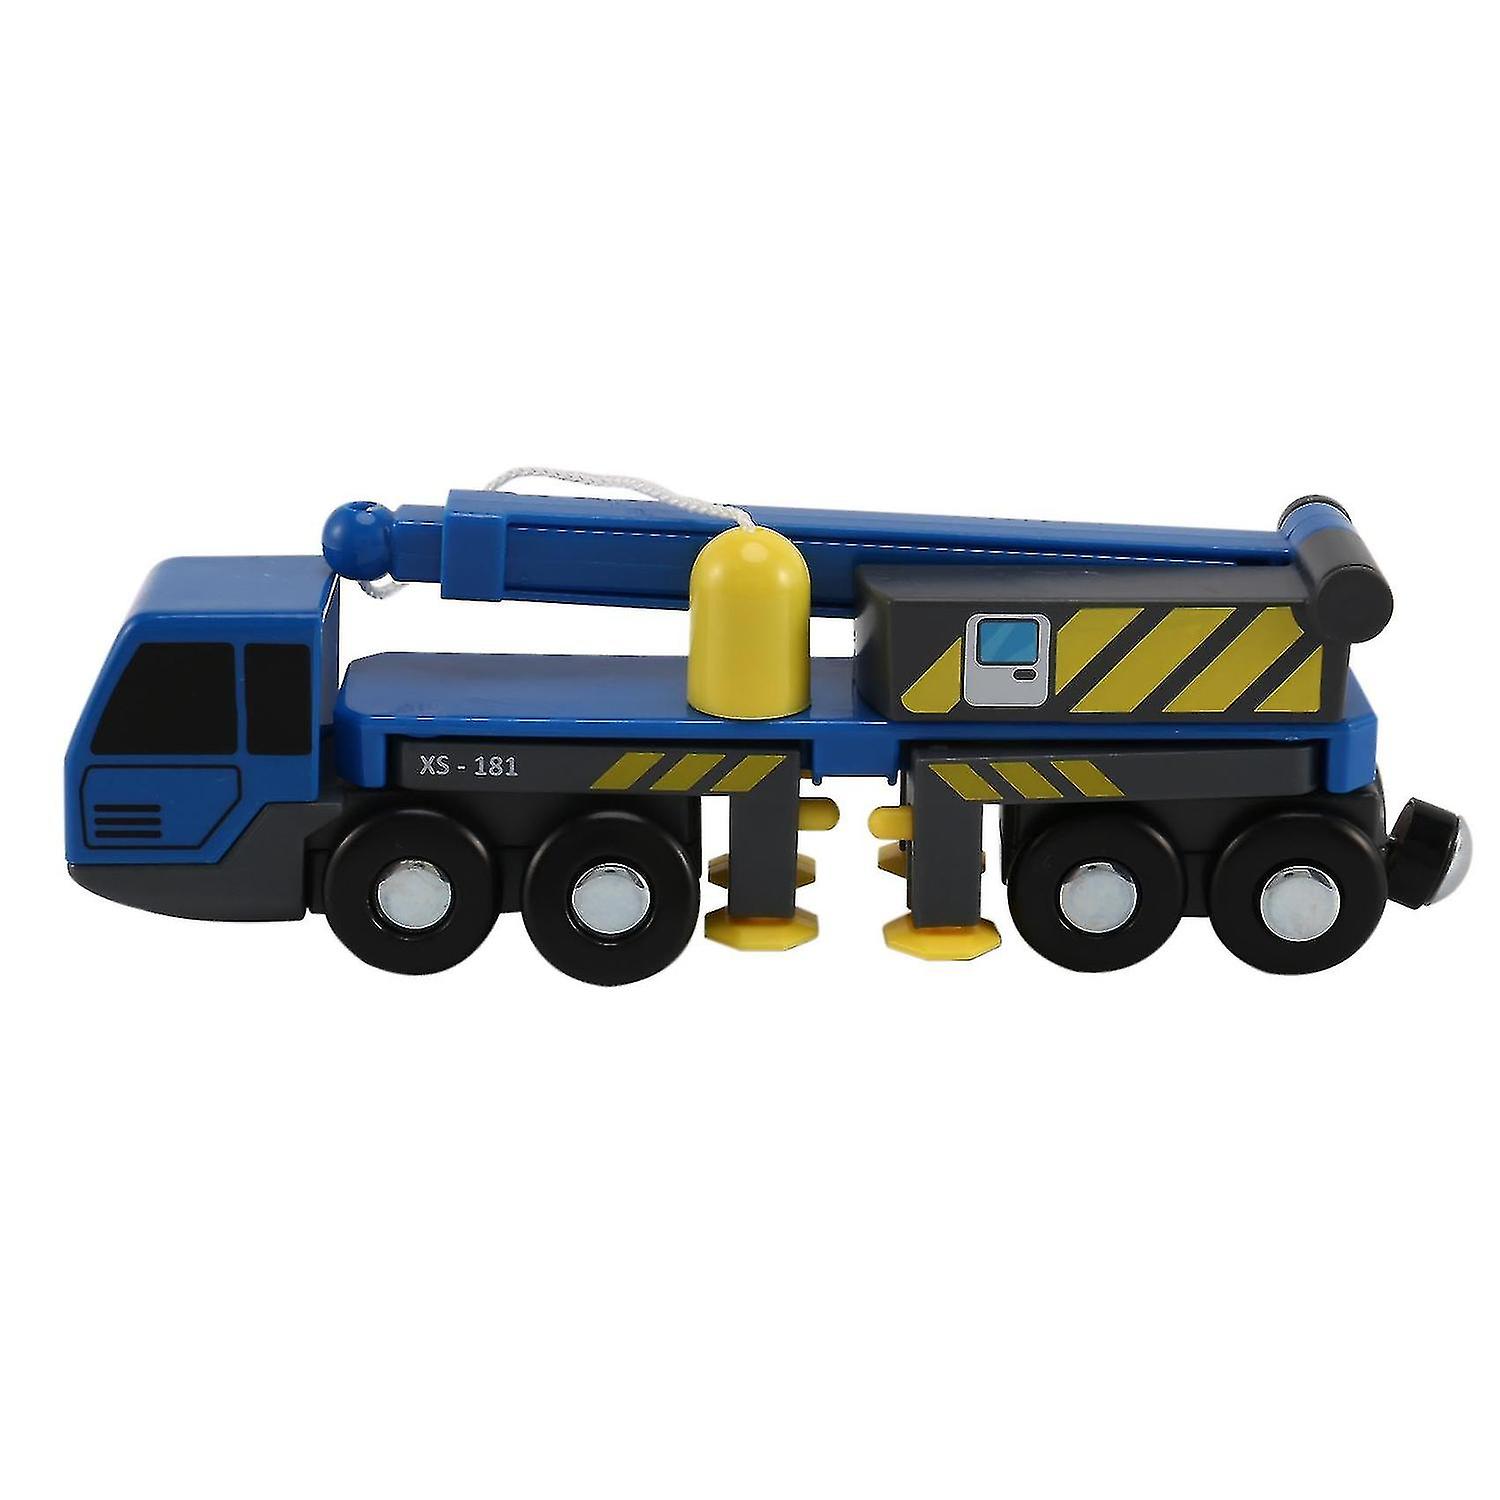 Crane Truck Vheicles Kids Toy Compatible With Wooden Tracks Railway